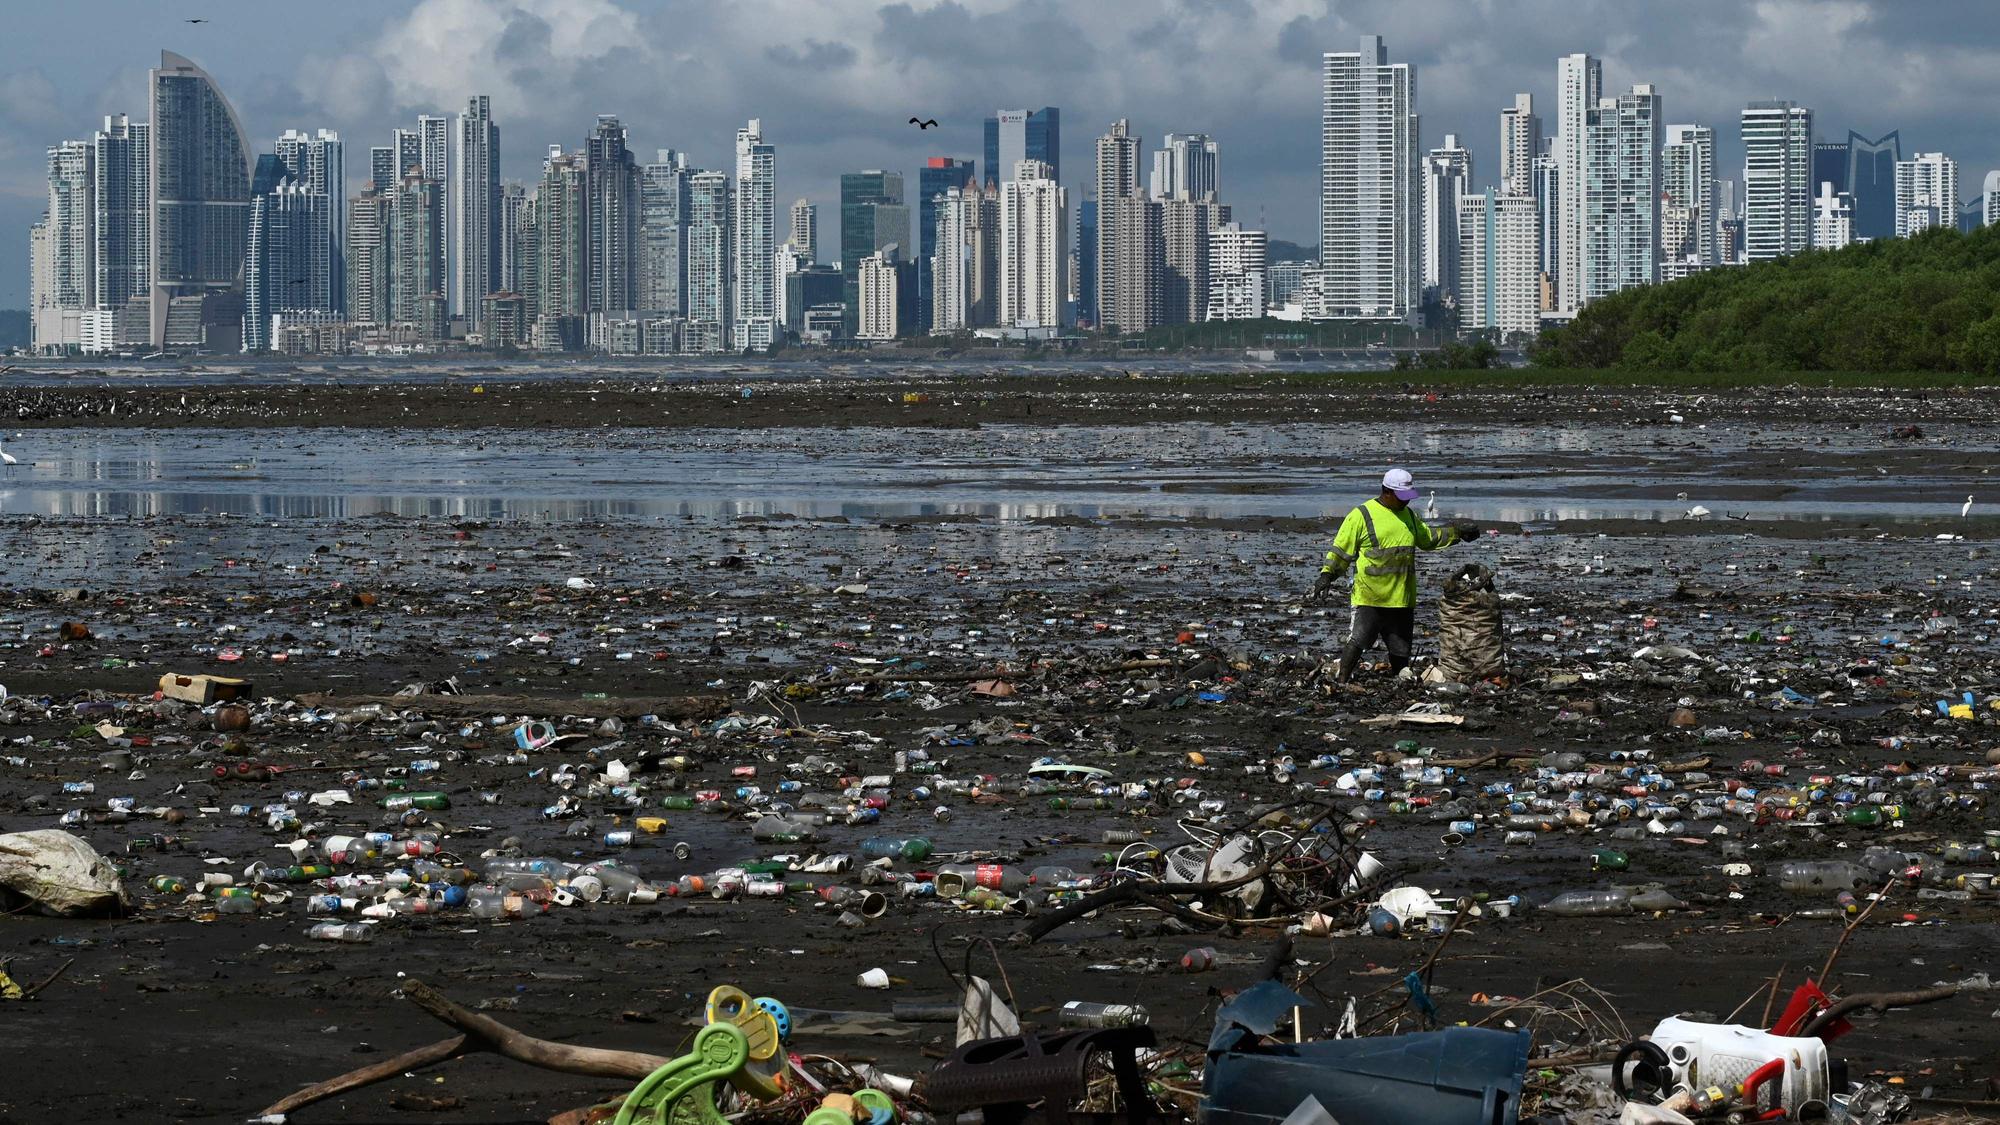 A man collects garbage, including plastic waste, at the beach of Costa del Este, in Panama City, on April 19, 2021. - Every two weeks, Marine Biology students descend about five meters in the sea to take care of a coral nursery of the staghorn species (Acropora cervicornis) in Portobelo, Panama, with which they aim to restore reefs damaged by climate change and pollution, as part of the Reef2Reef project. (Photo by Luis ACOSTA / AFP)